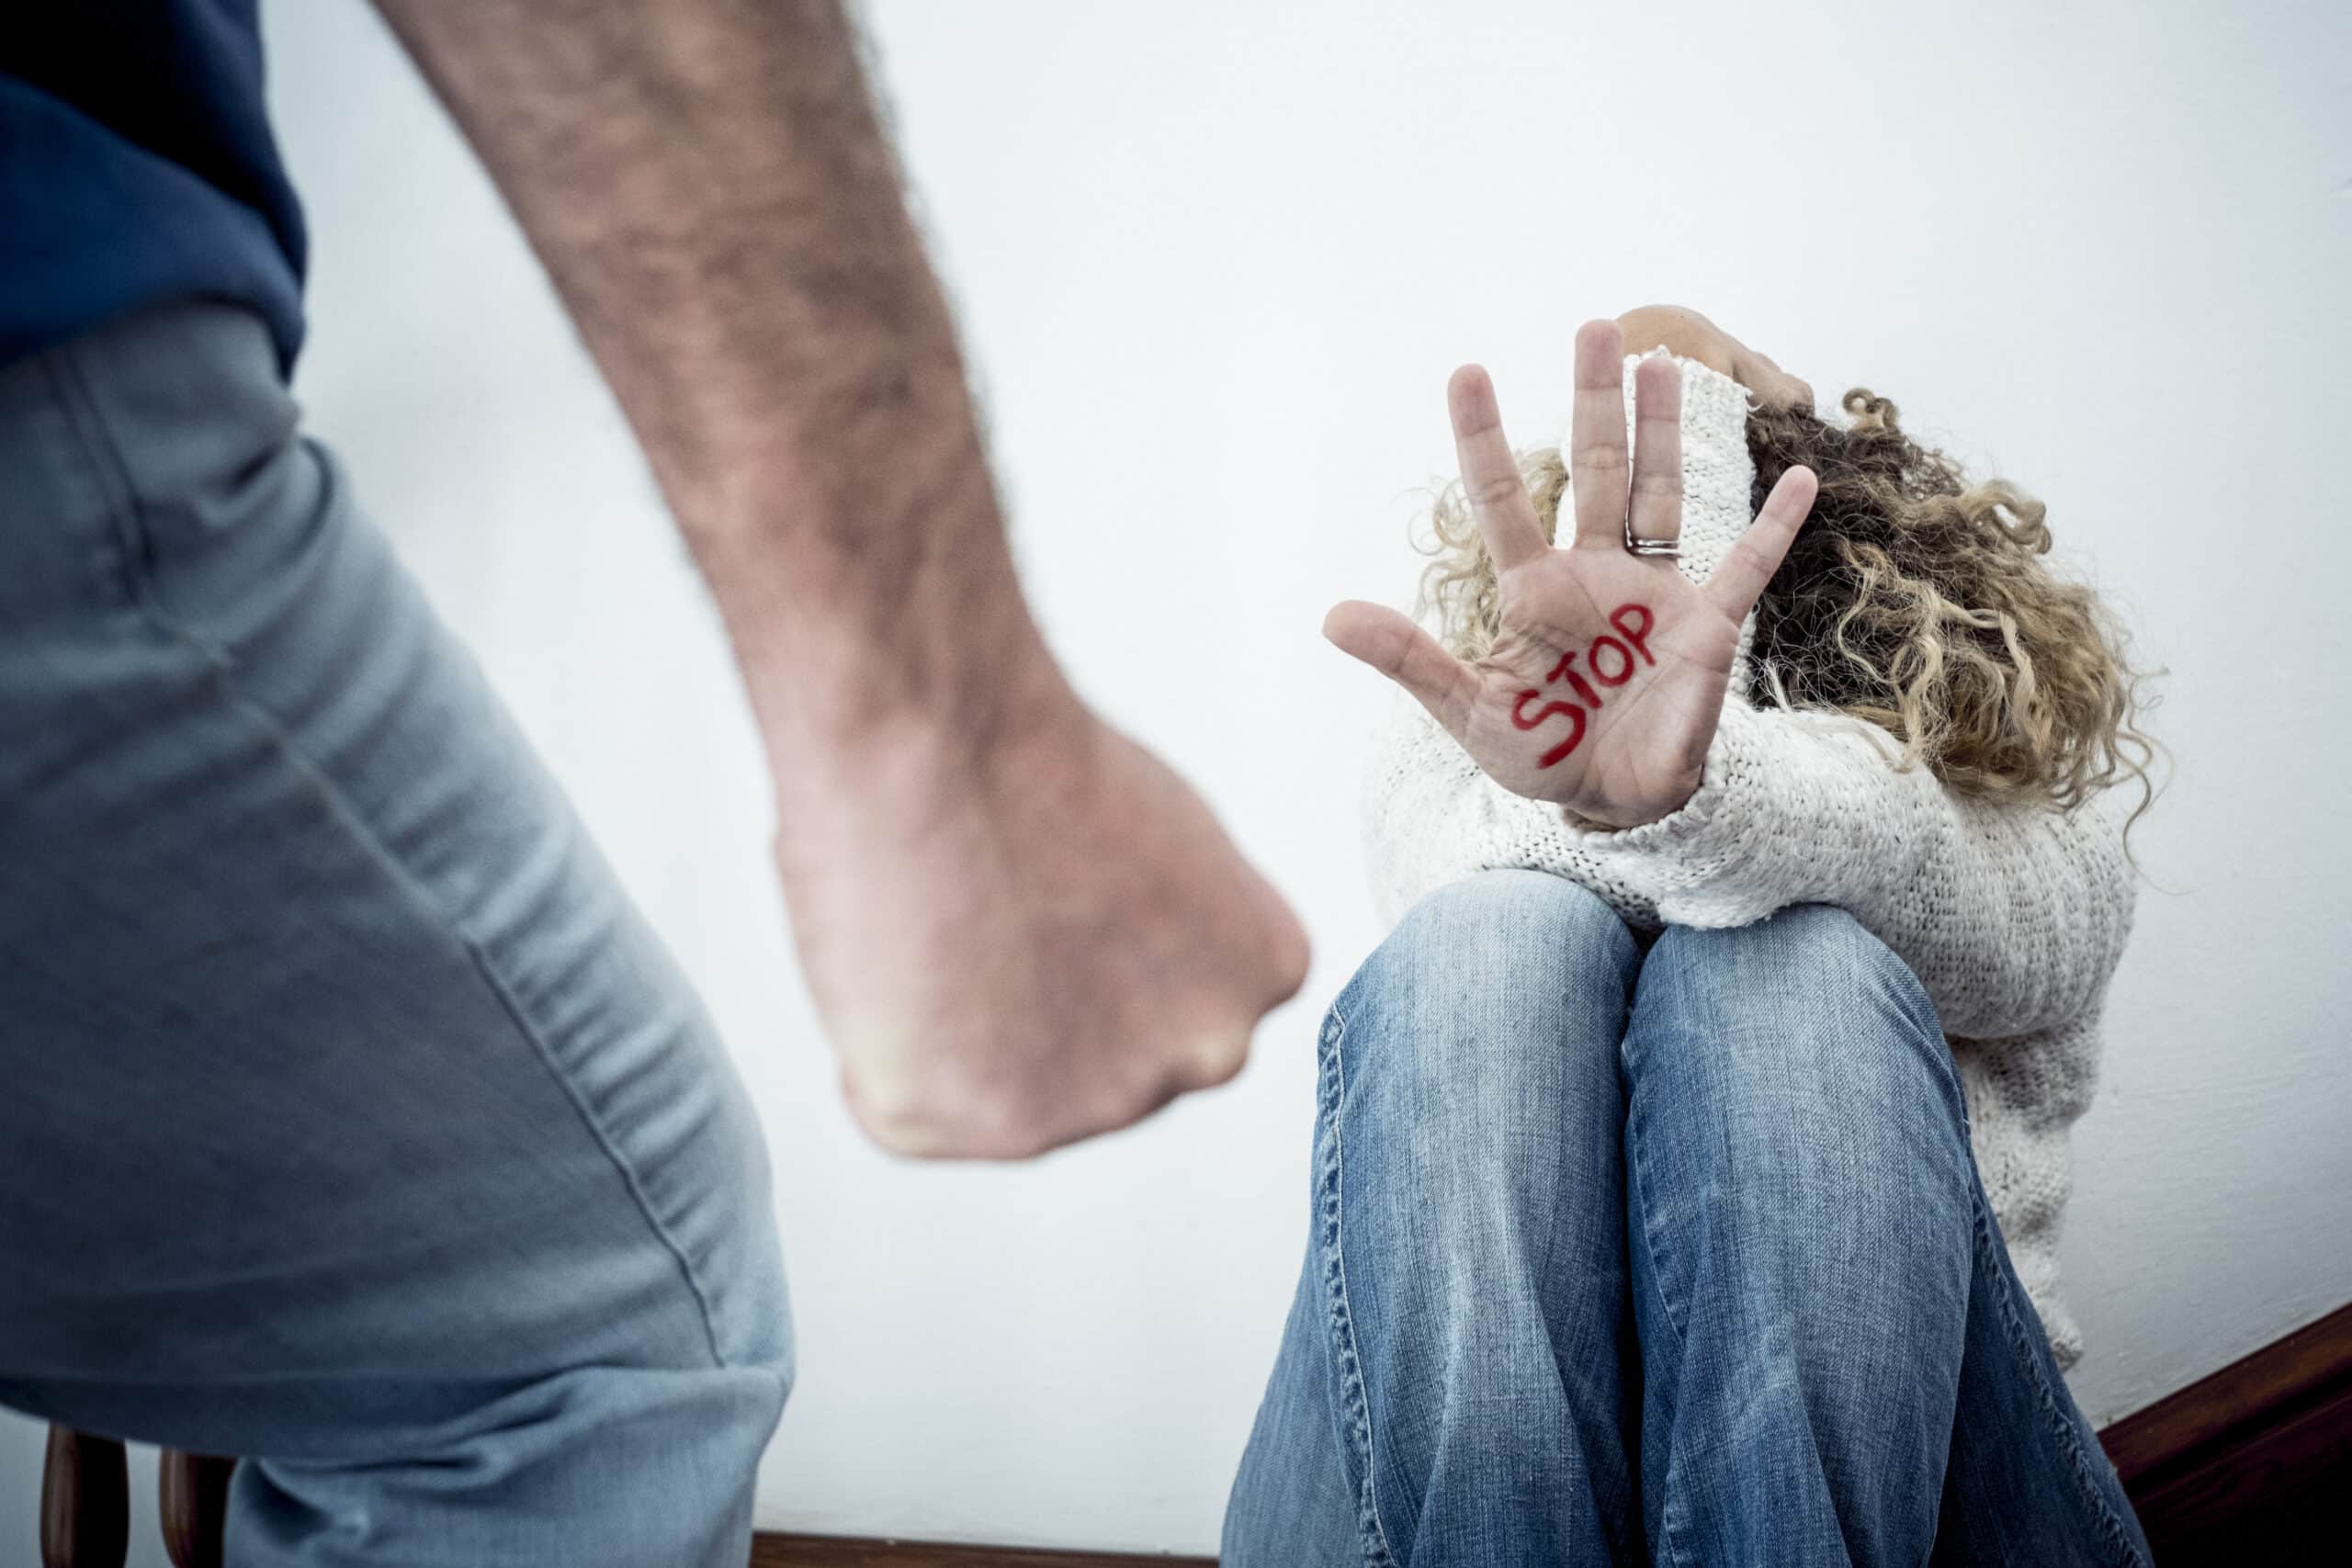 Who Can File A Domestic Violence Restraining Order In Wisconsin?